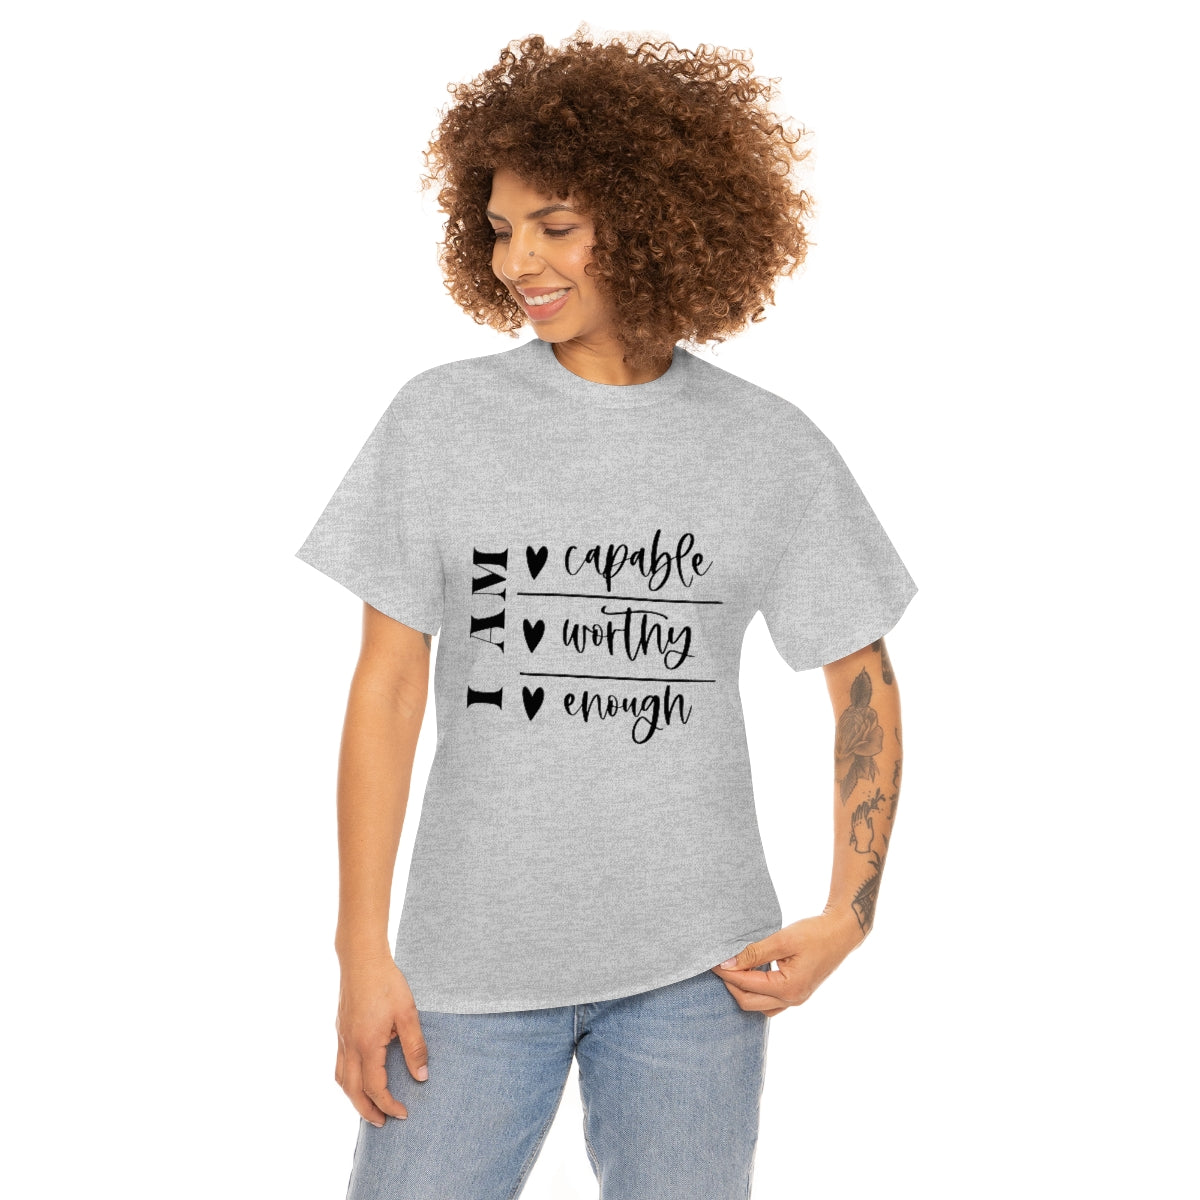 I am capable worthy and enough Unisex Heavy Cotton Tee